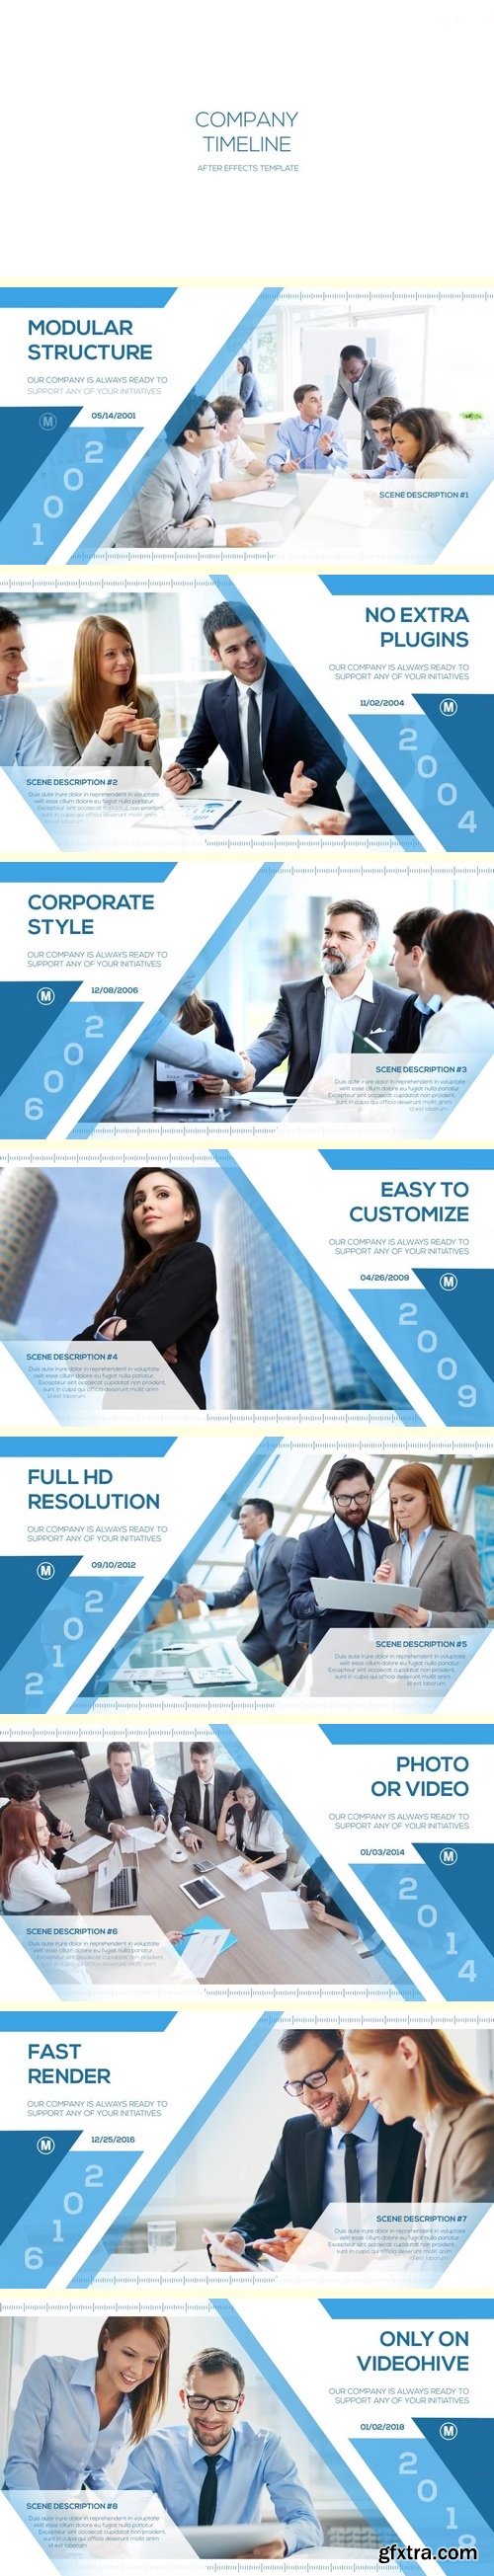 MotionArray - Company Timeline After Effects Templates 58541